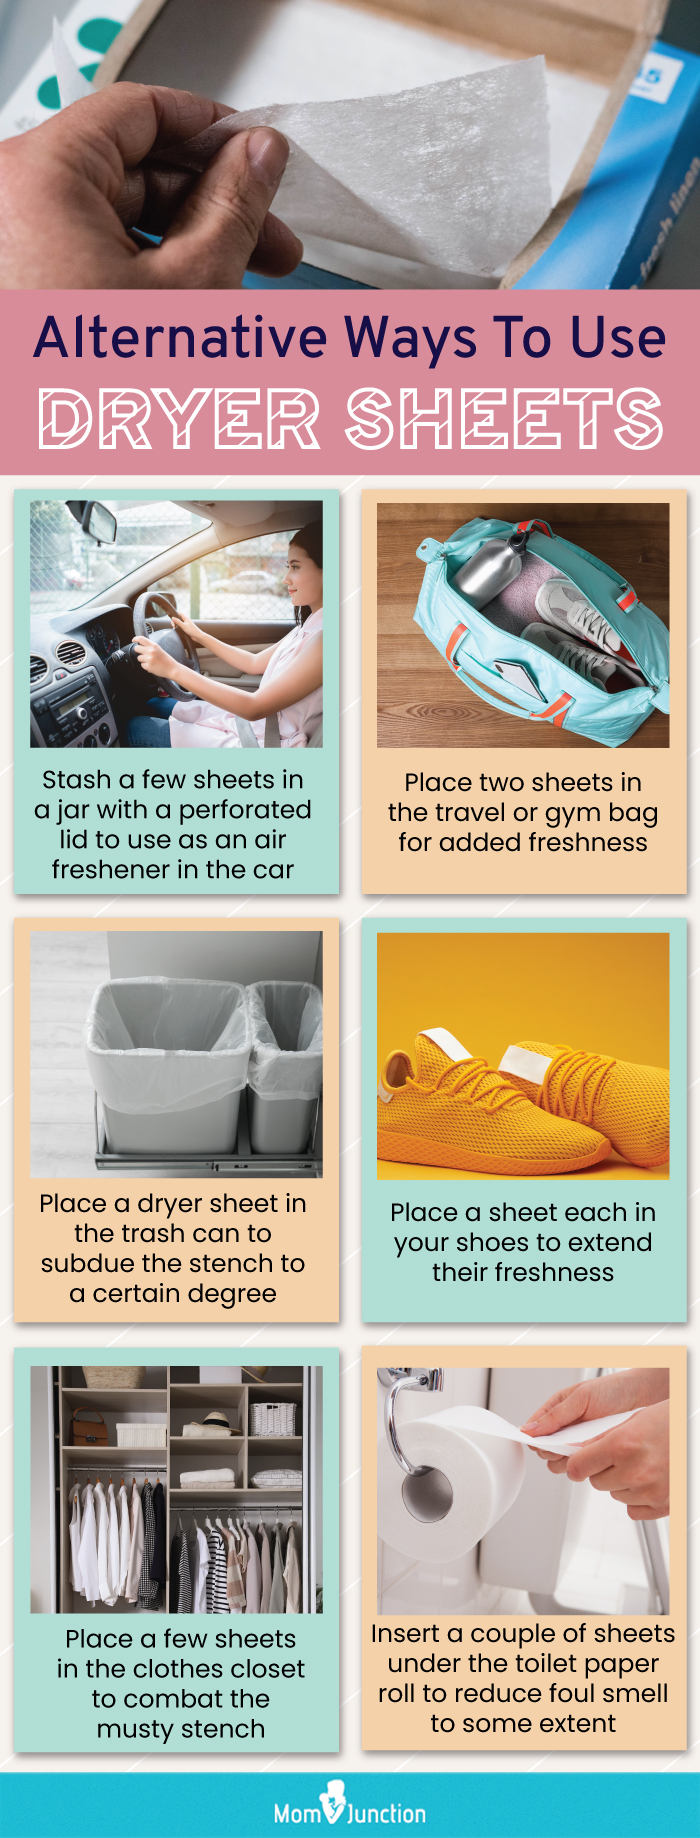 https://www.momjunction.com/wp-content/uploads/2023/02/Infographic-Different-Ways-Of-Using-Dryer-Sheets.jpg